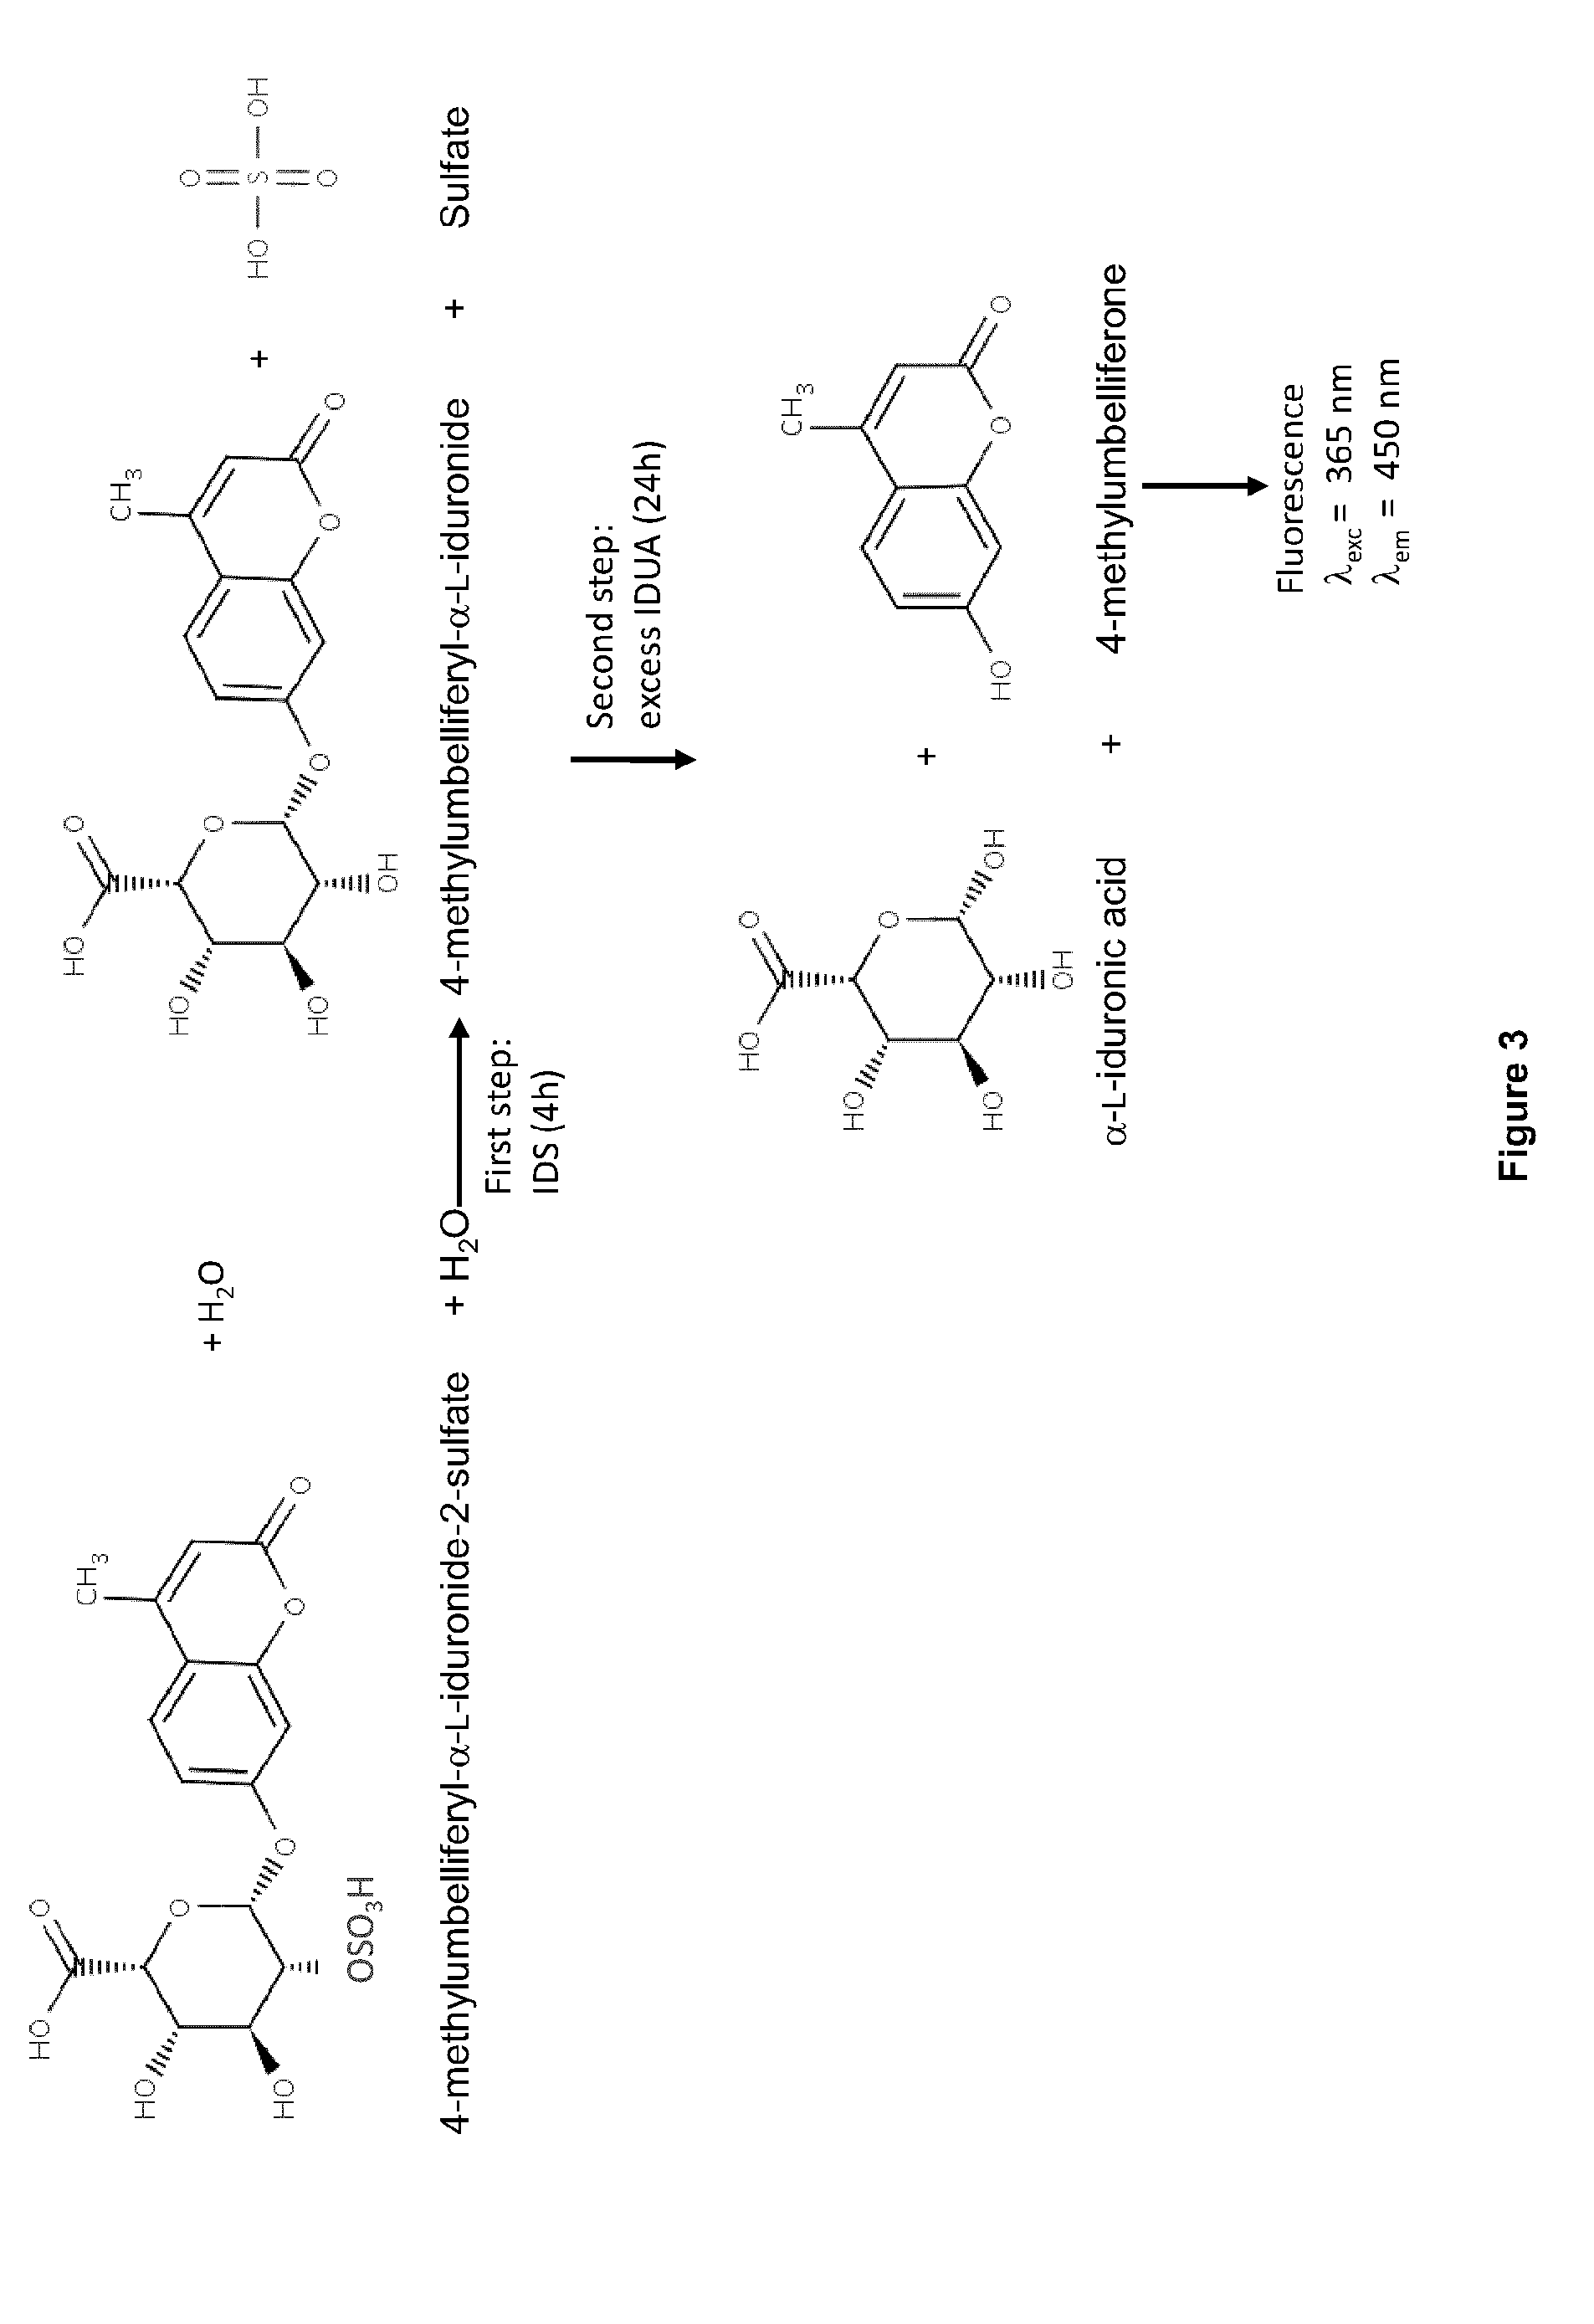 Targeted lysosomal enzyme compounds